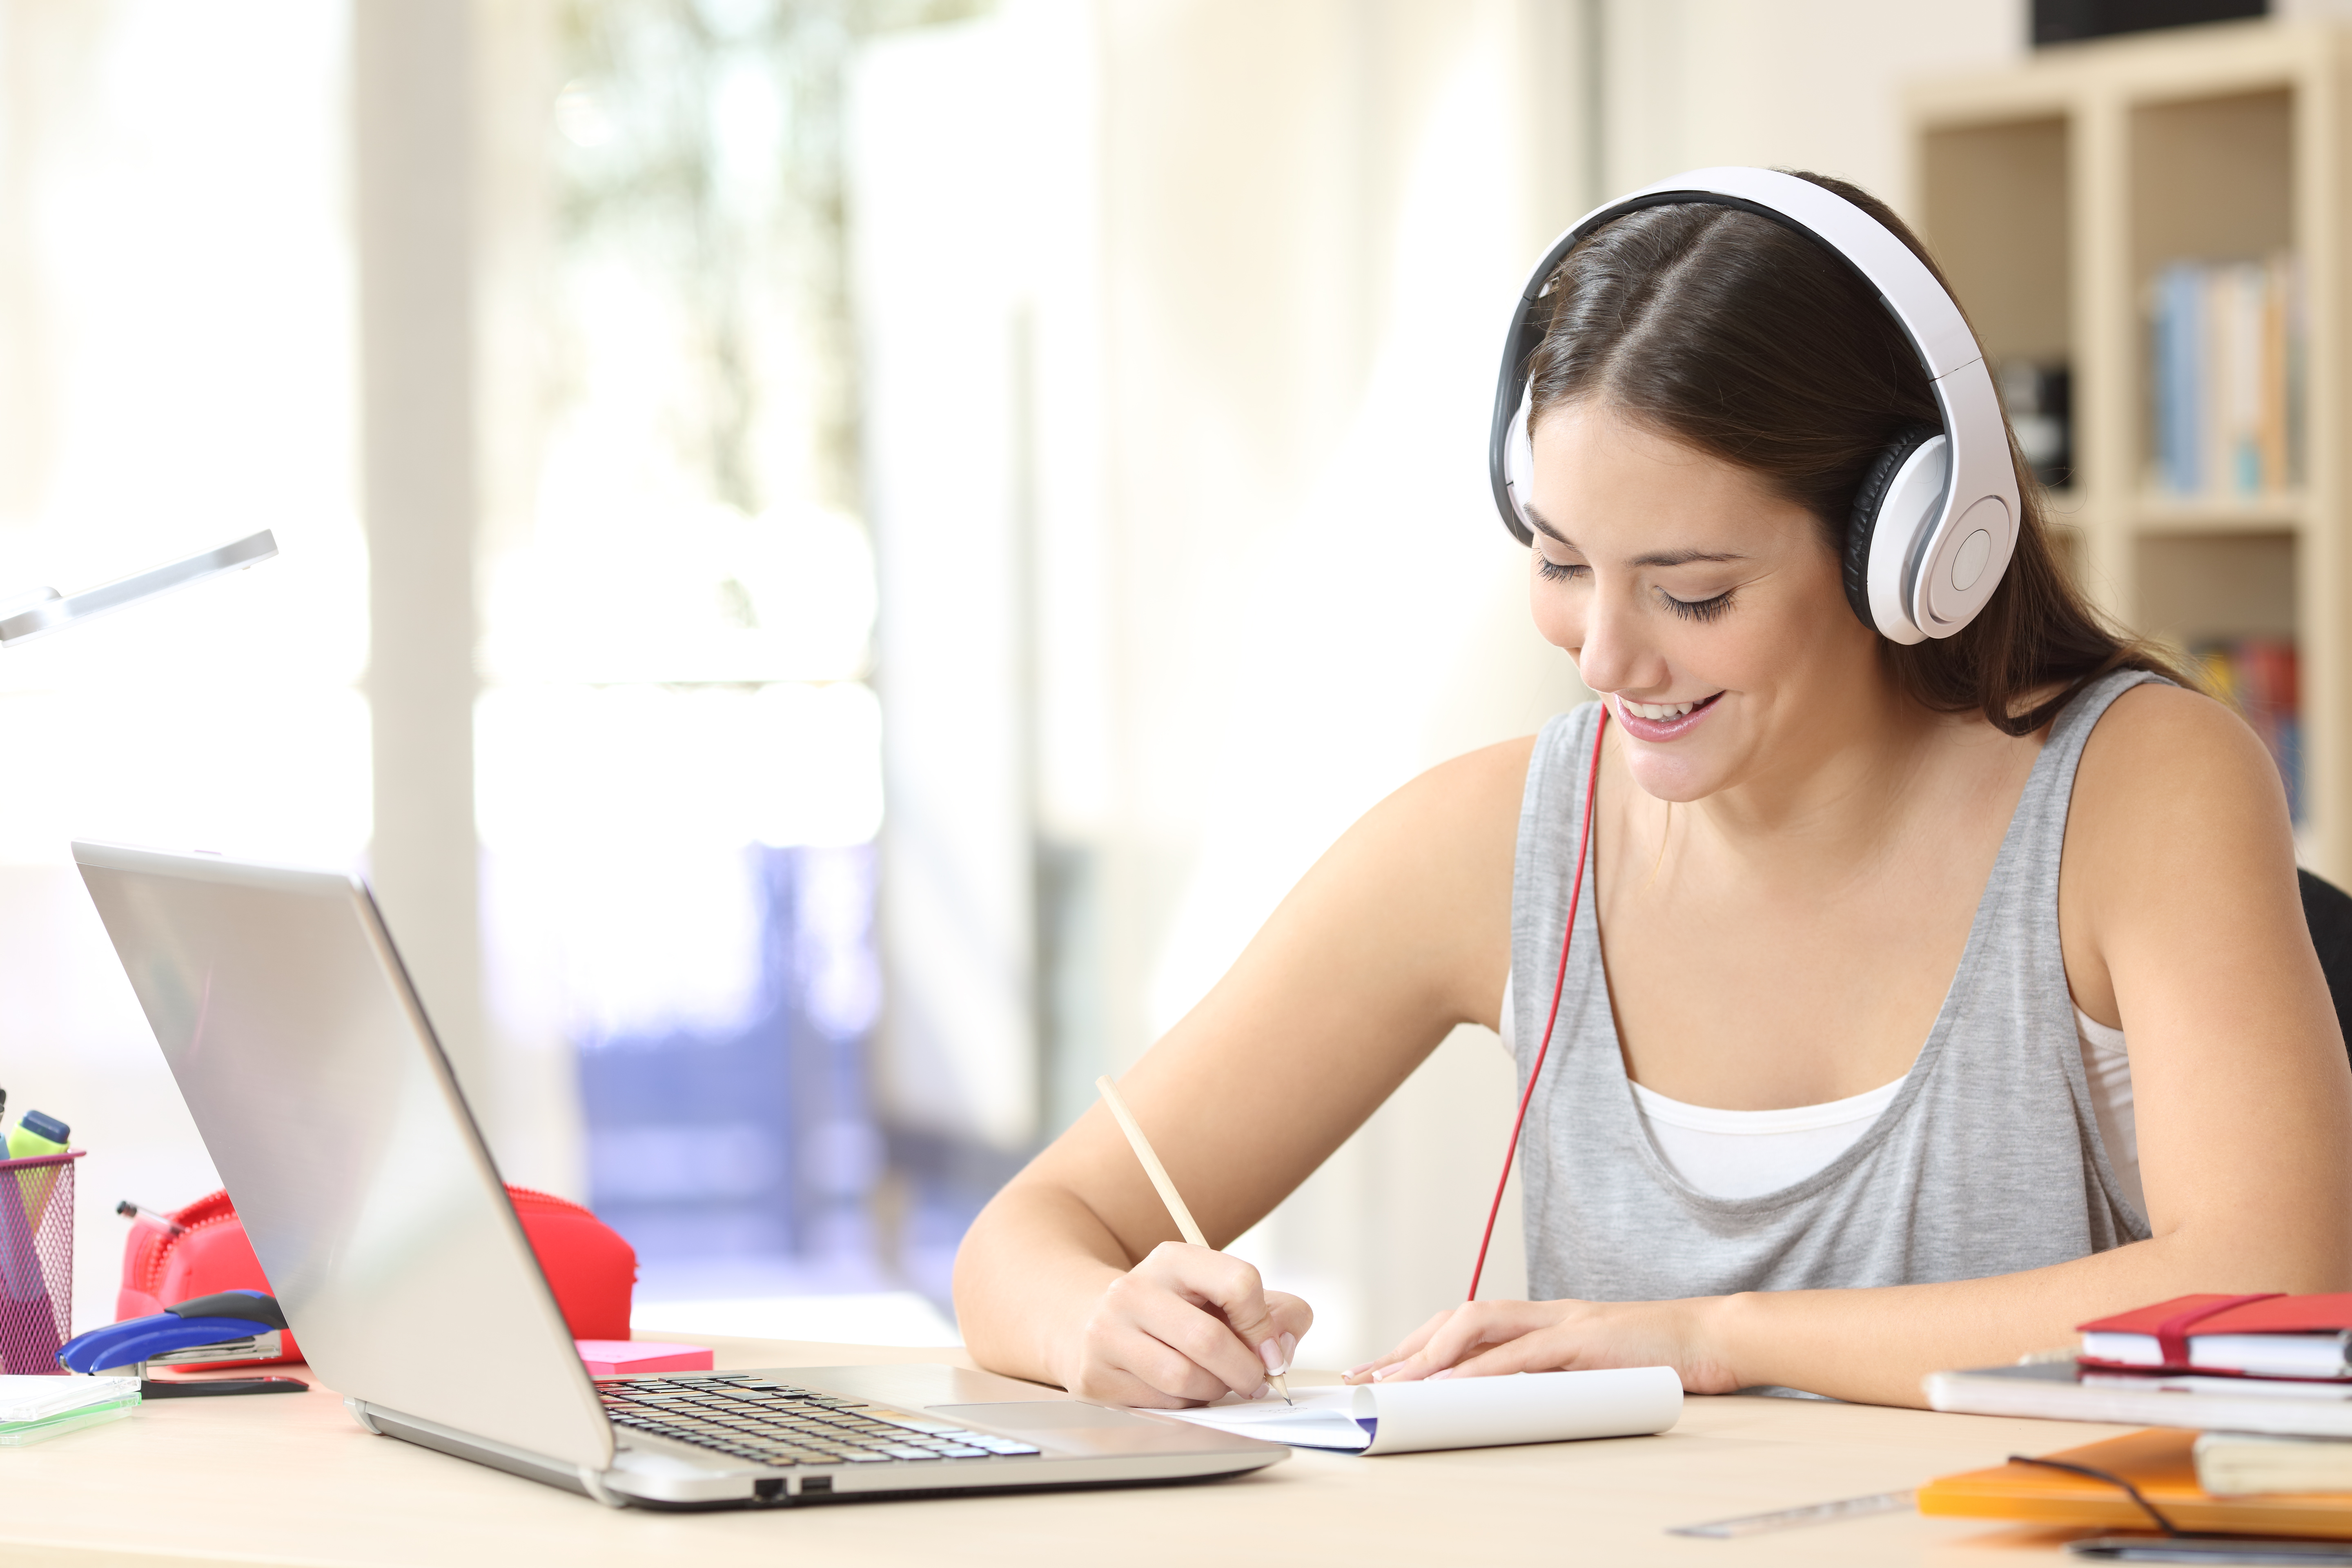 Benefits Of Online Education